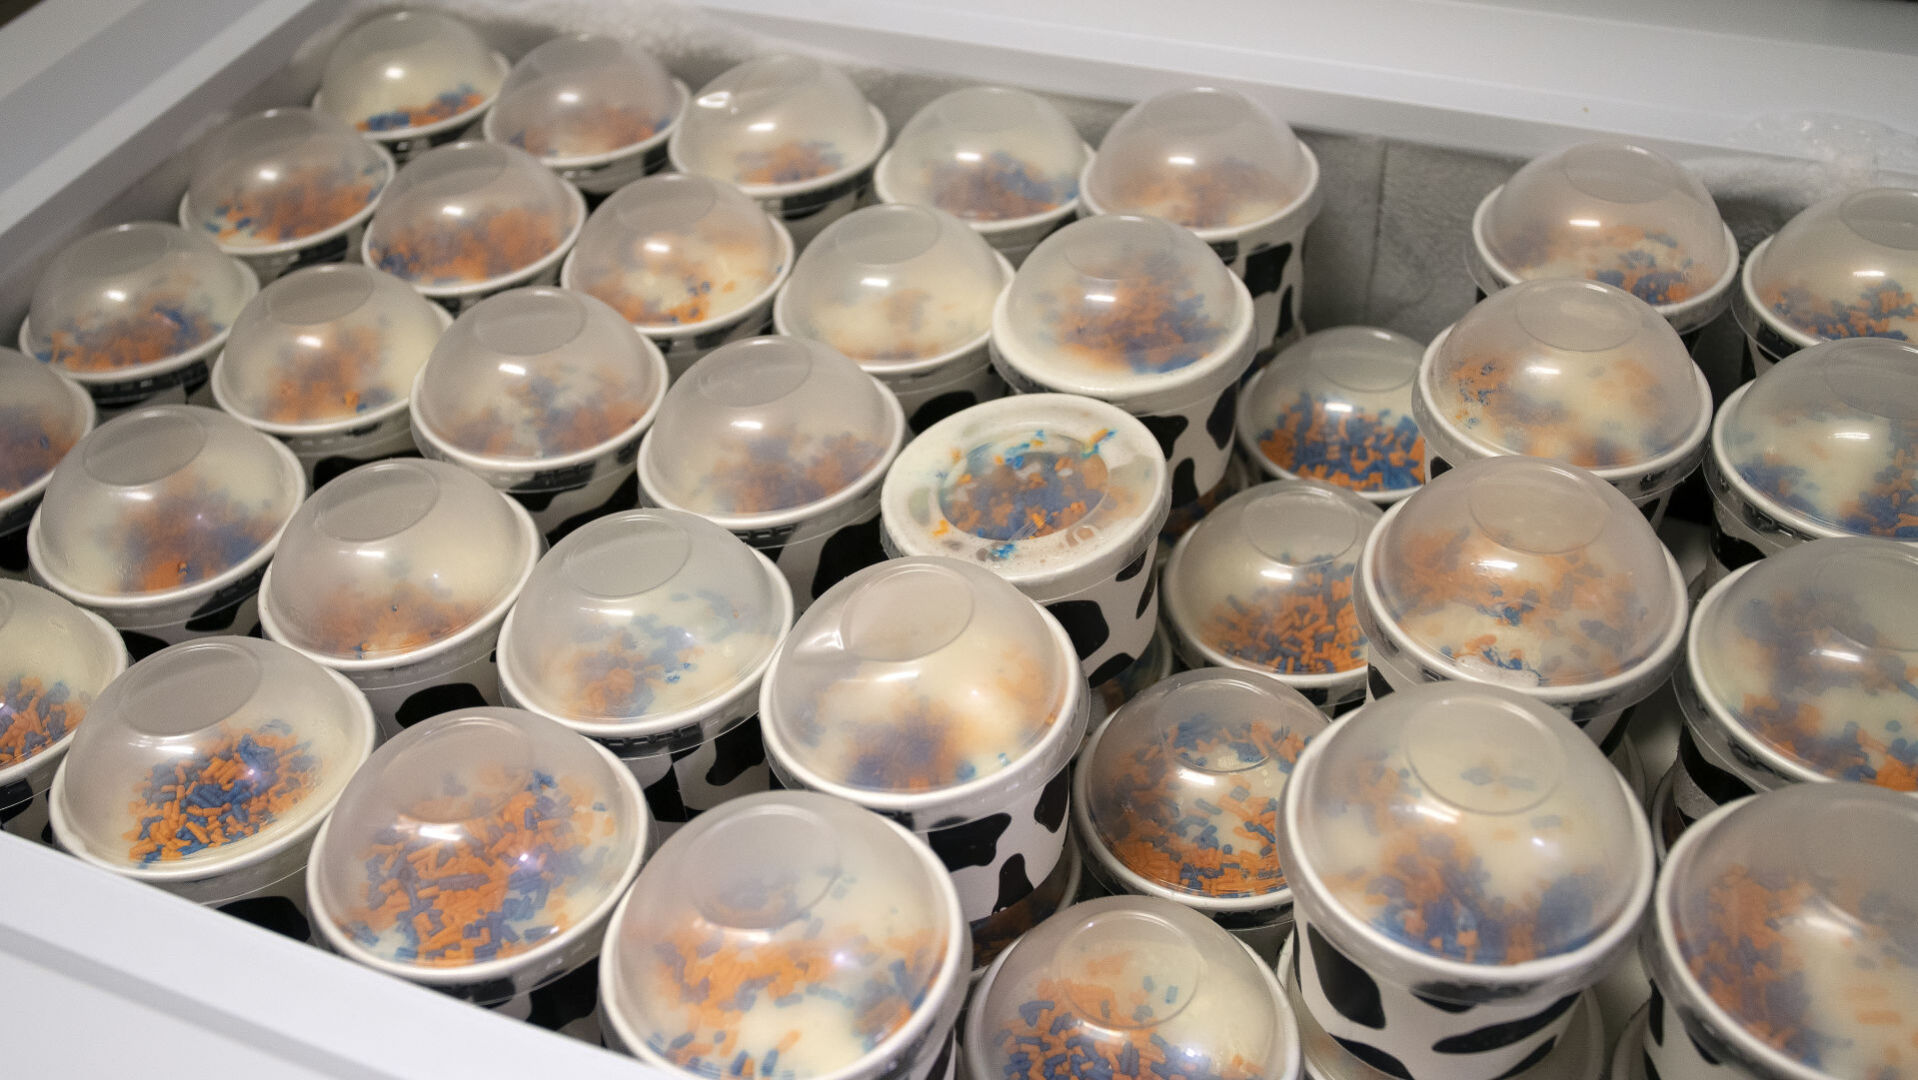 Dishes of ice cream sit in a freezer at the Pioneer Sweets production facility at the University of Wisconsin-Platteville on Monday, Oct. 18, 2021.    PHOTO CREDIT: Stephen Gassman